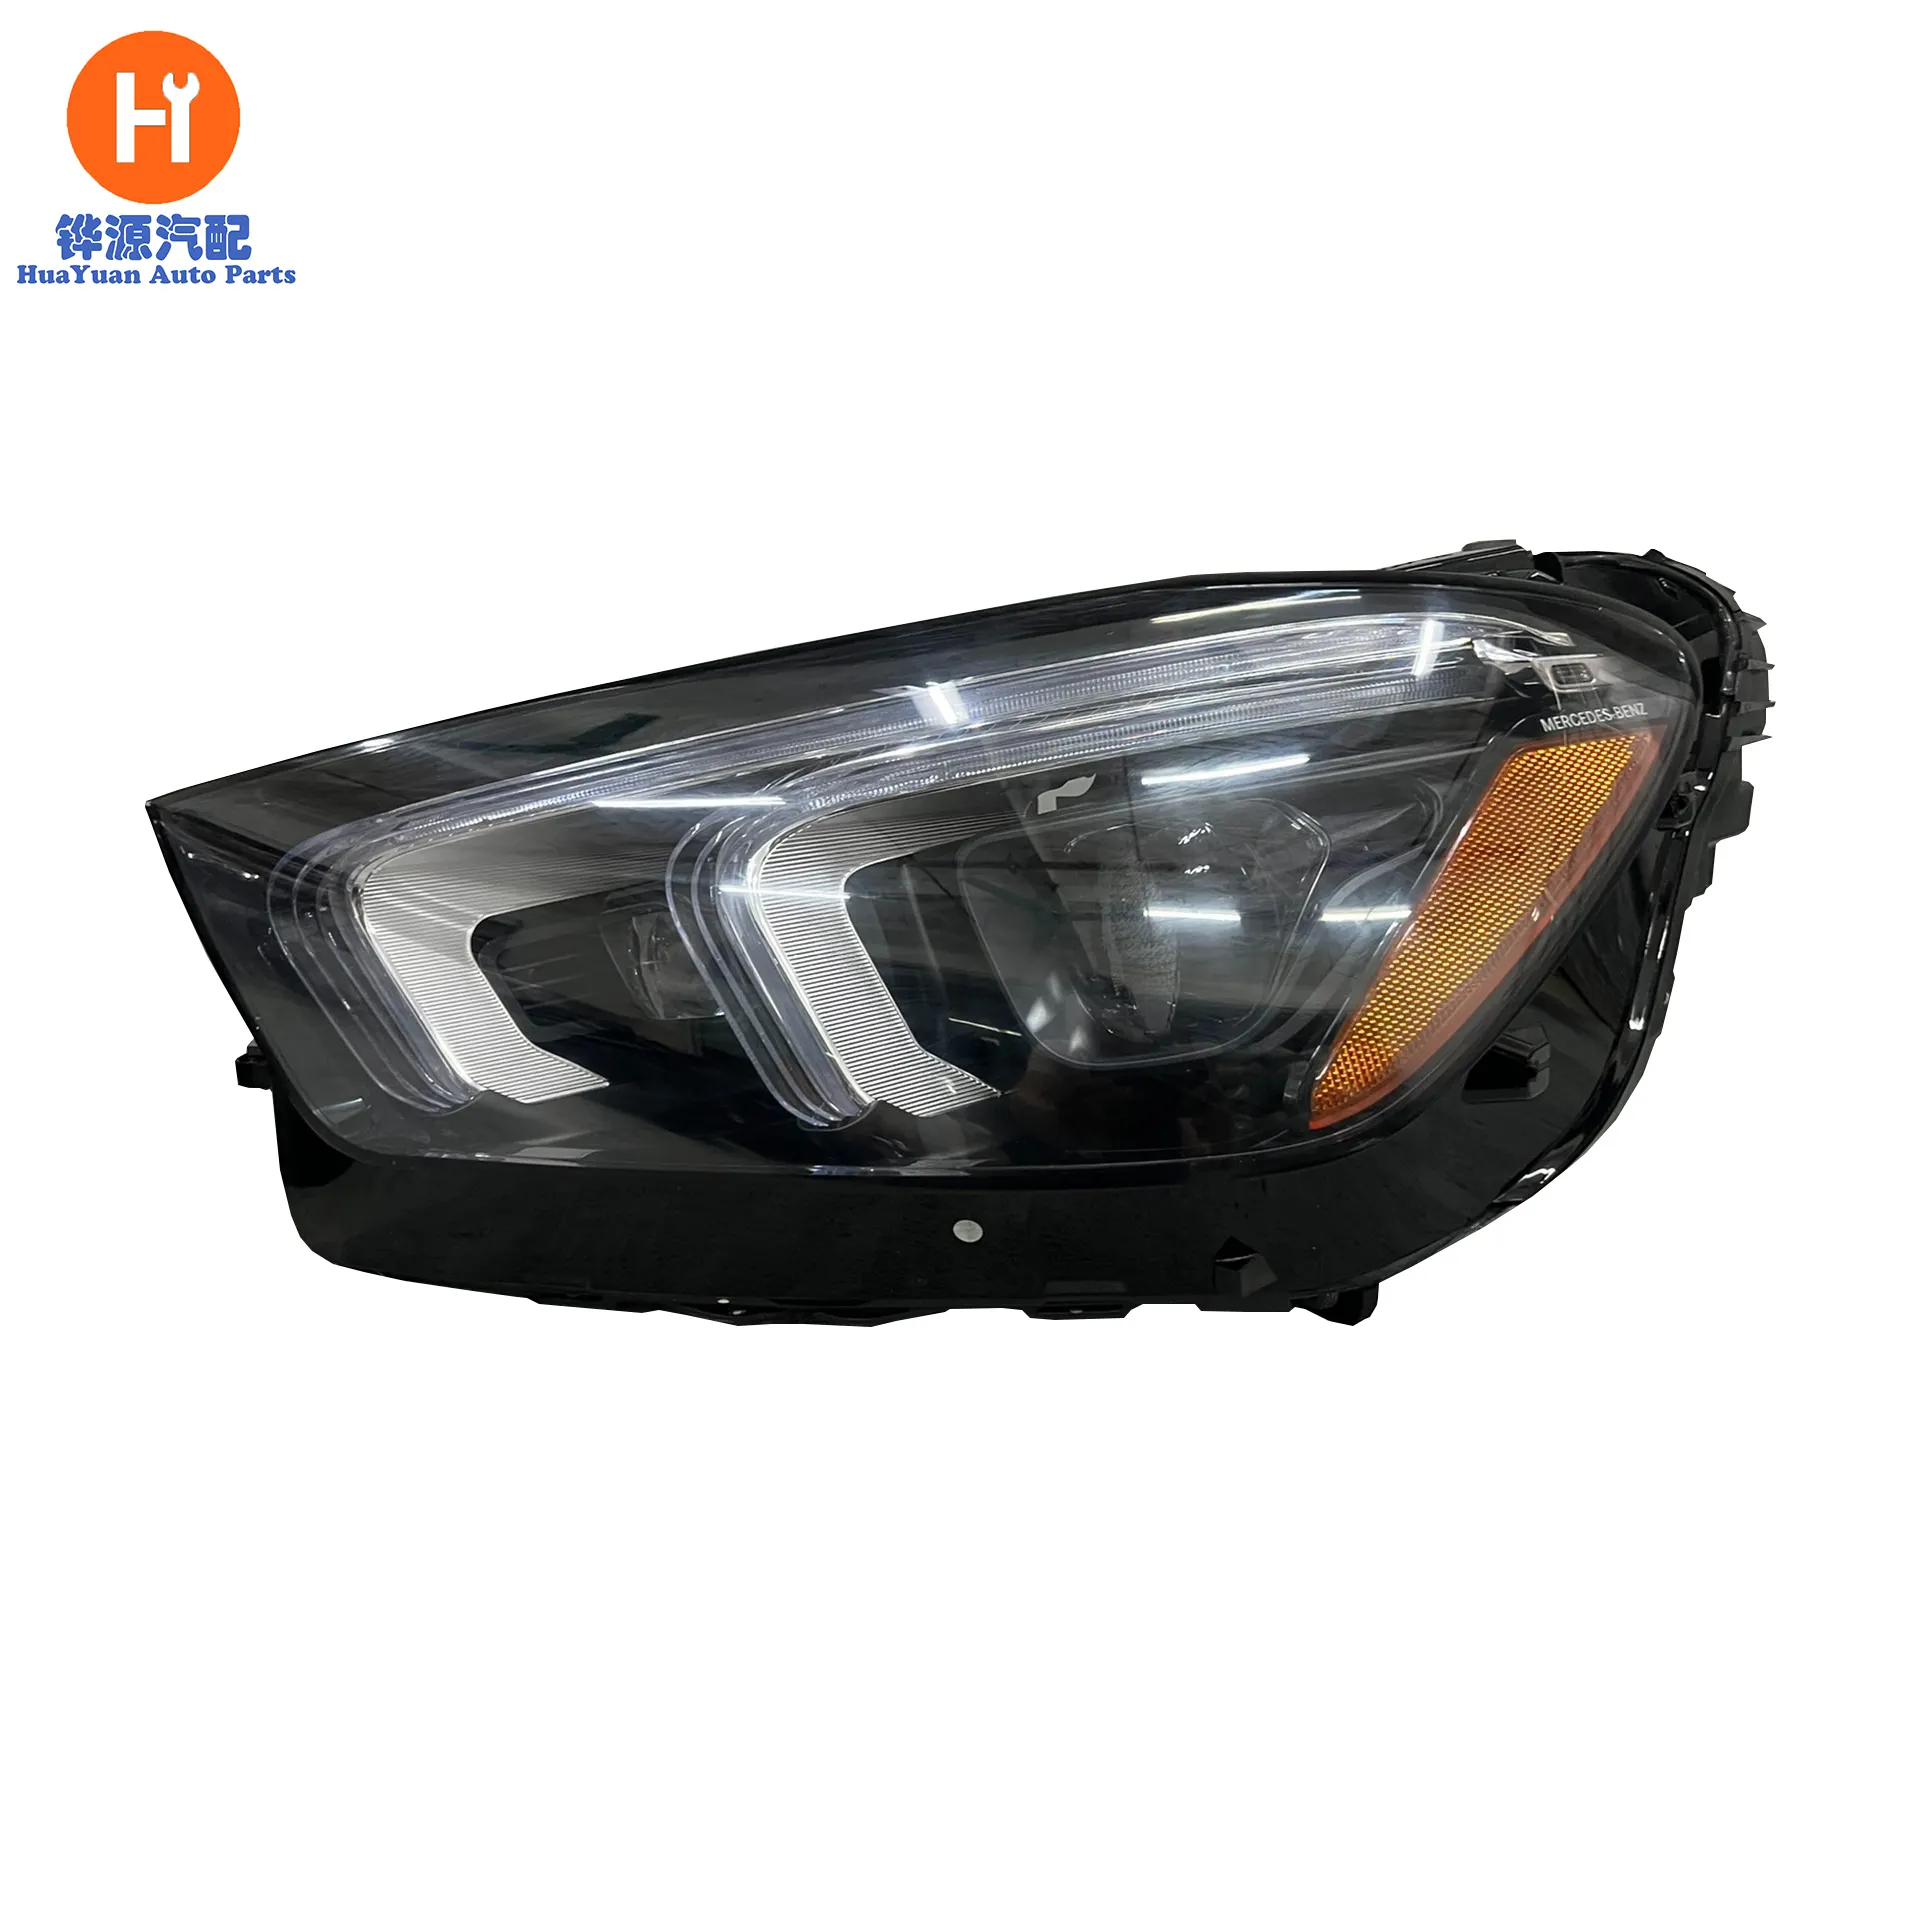 Suitable for Mercedes Benz GLE167 headlights GLE350 GLE400 GLE450 W167 LED Headlight Assembly 2020 2021 2022 Models